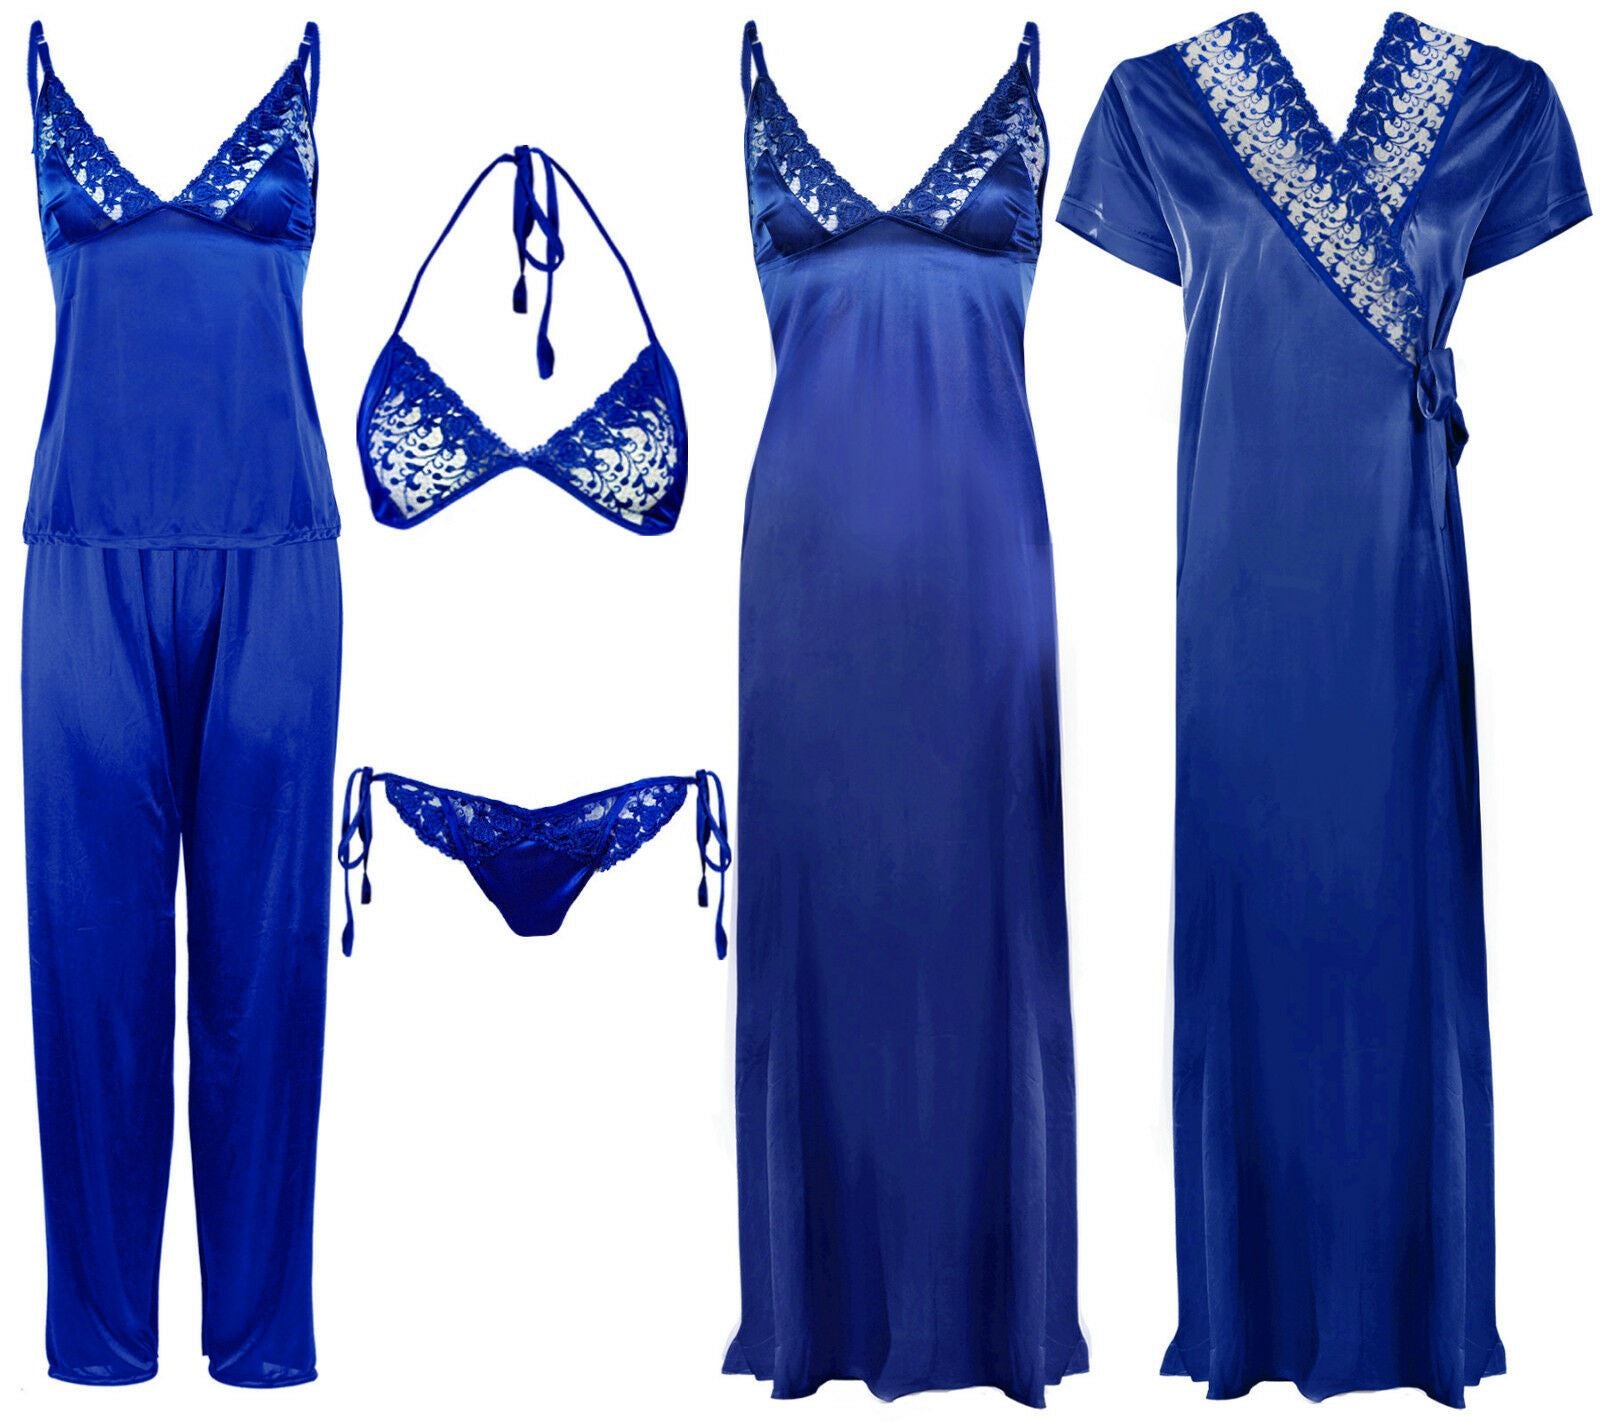 Royal Blue / One Size 6 Piece Satin Nightwear Set with Lingeries The Orange Tags